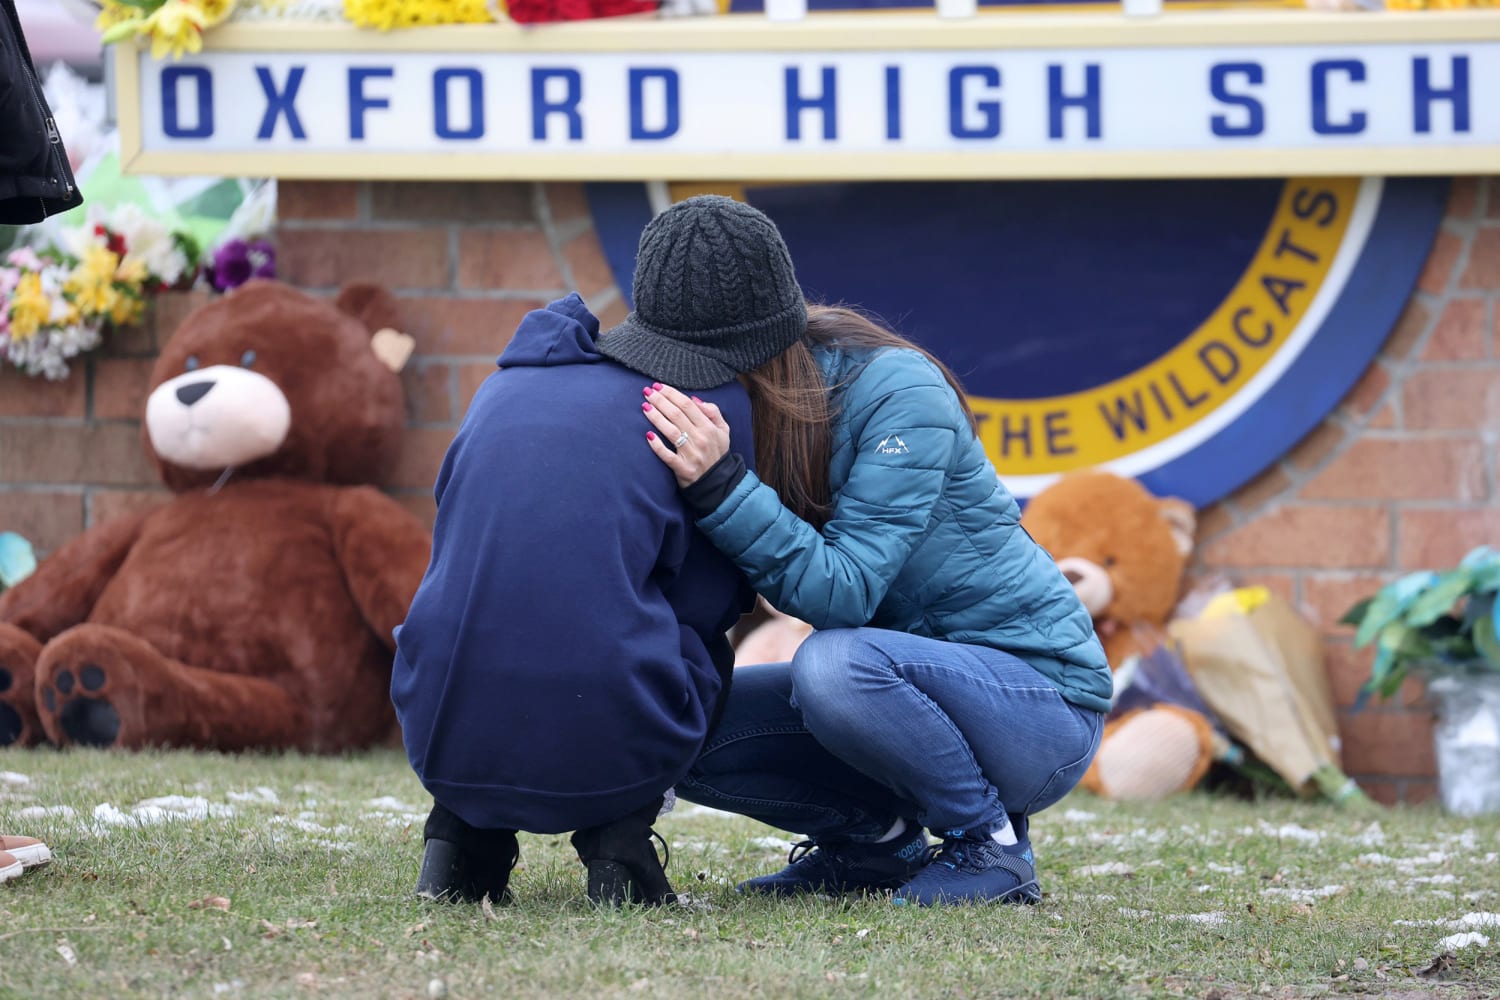 Discipline not needed for teenager before Michigan shooting, superintendent says